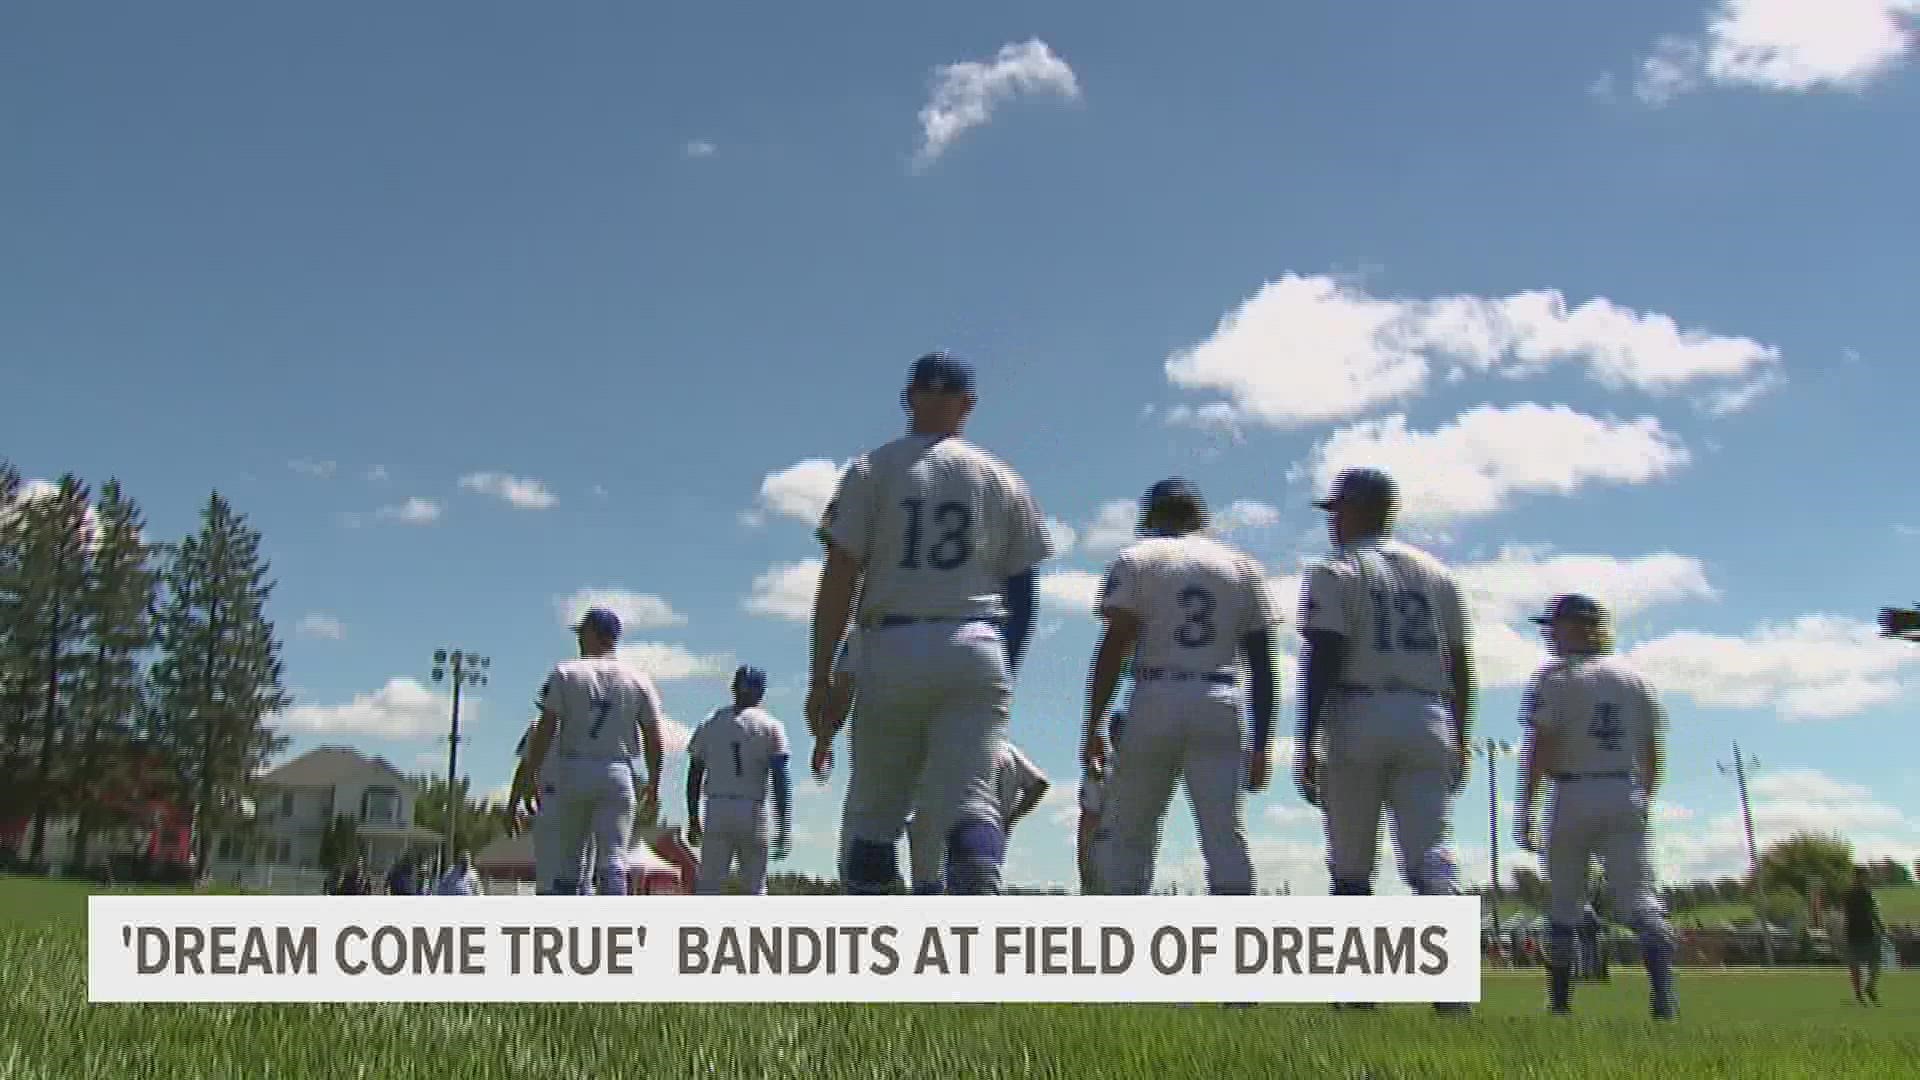 River Bandits players got to soak in the dream of playing on the Field of Dreams ahead of Tuesday's game, and it's an experience they won't forget.